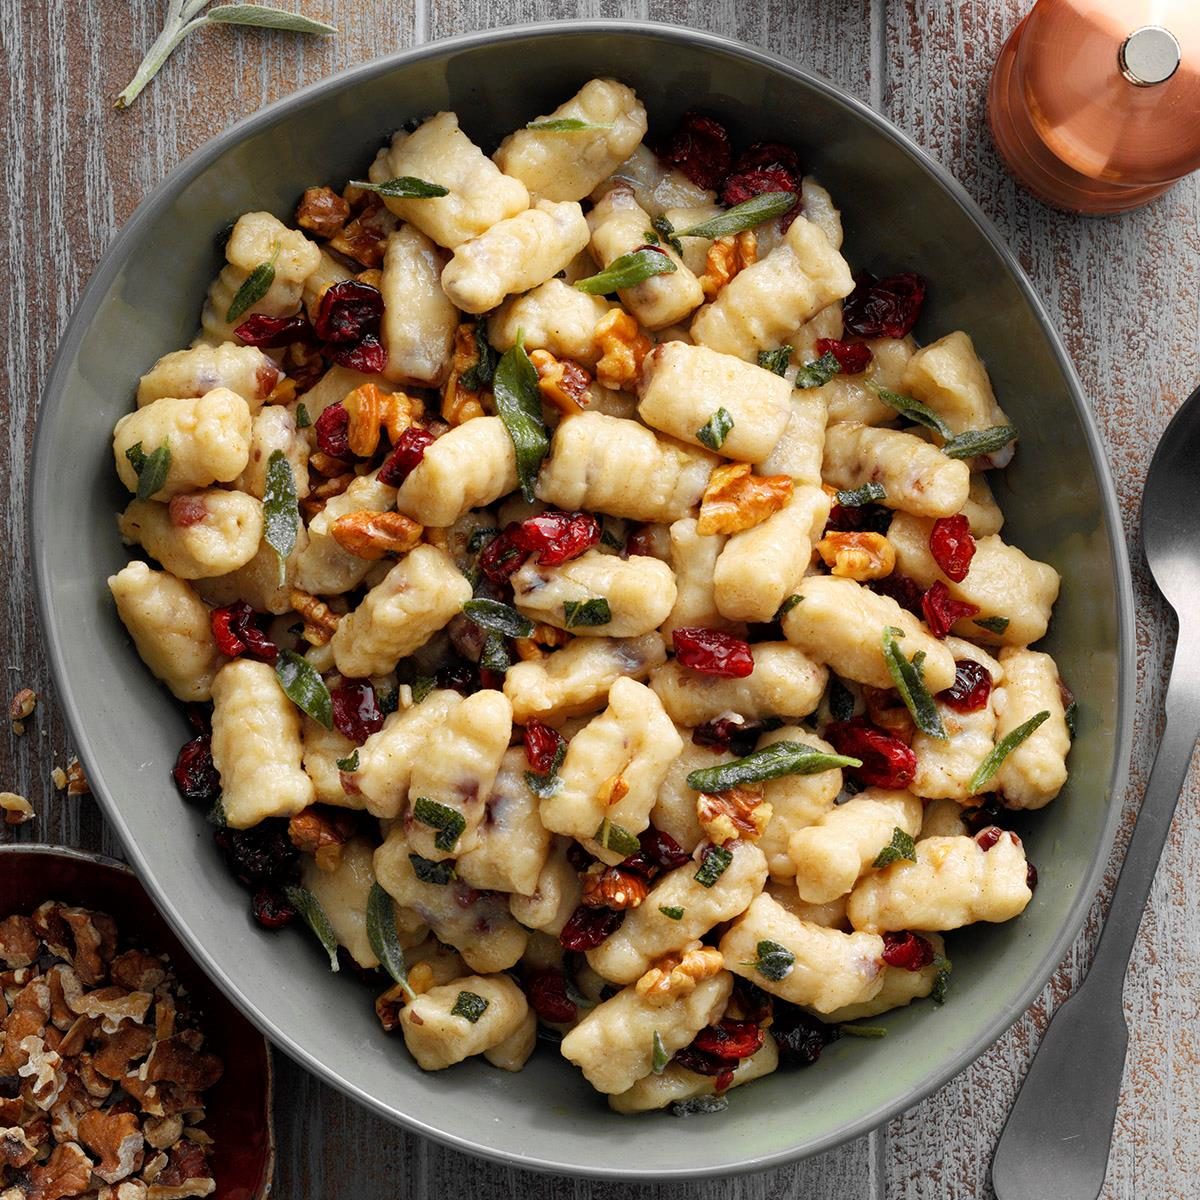 https://www.tasteofhome.com/wp-content/uploads/2018/01/Cranberry-Ricotta-Gnocchi-with-Brown-Butter-Sauce_EXPS_THCA21_135337_B12_18_4b-1.jpg